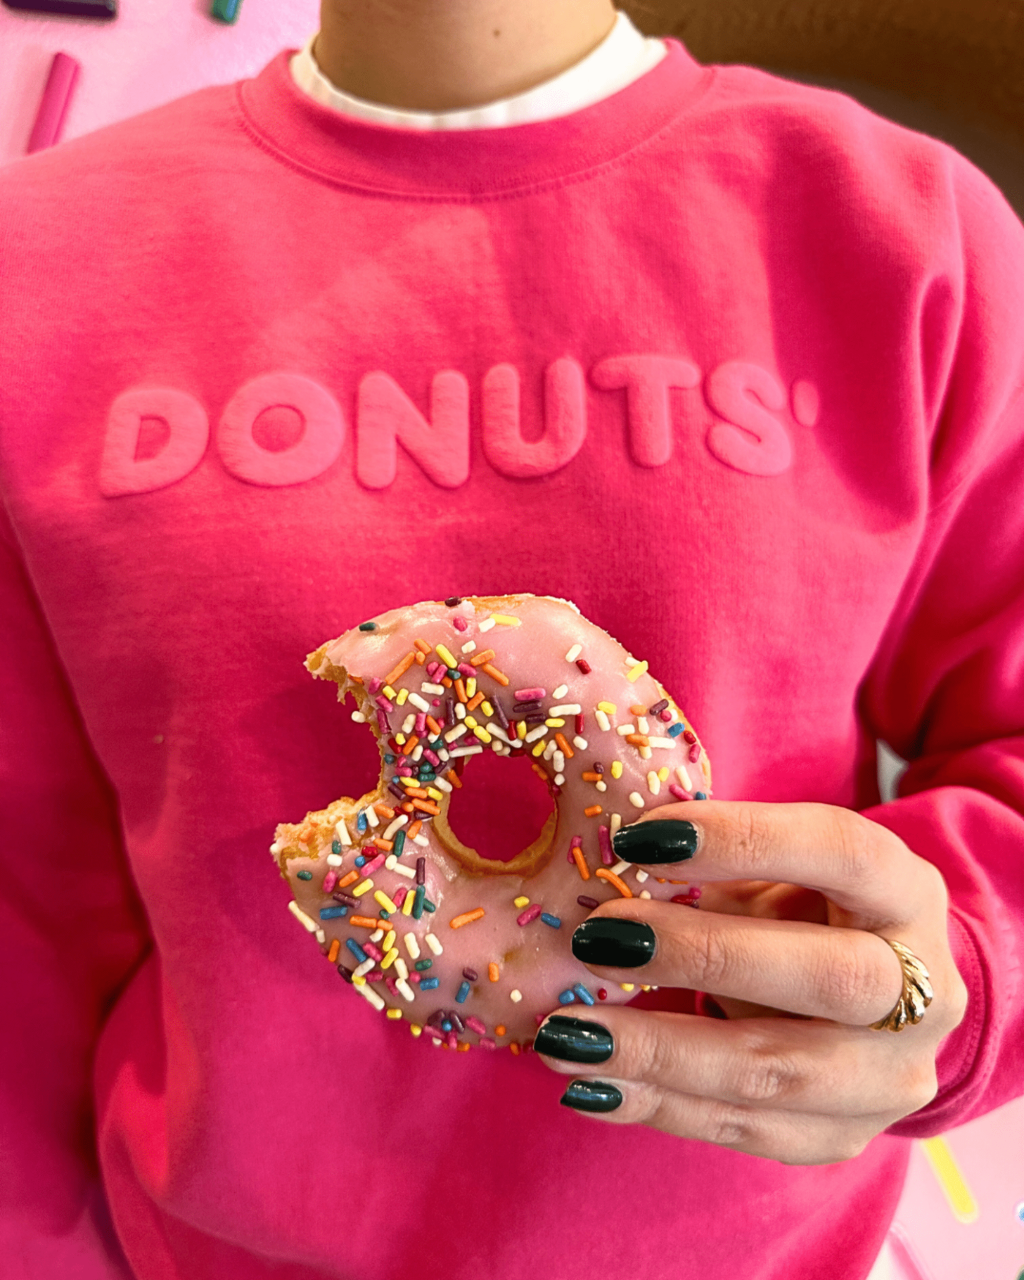 dunkin’-donuts-serves-up-apparel,-april-fool’s-day-name-and-supposedly-5,000-coffee choices